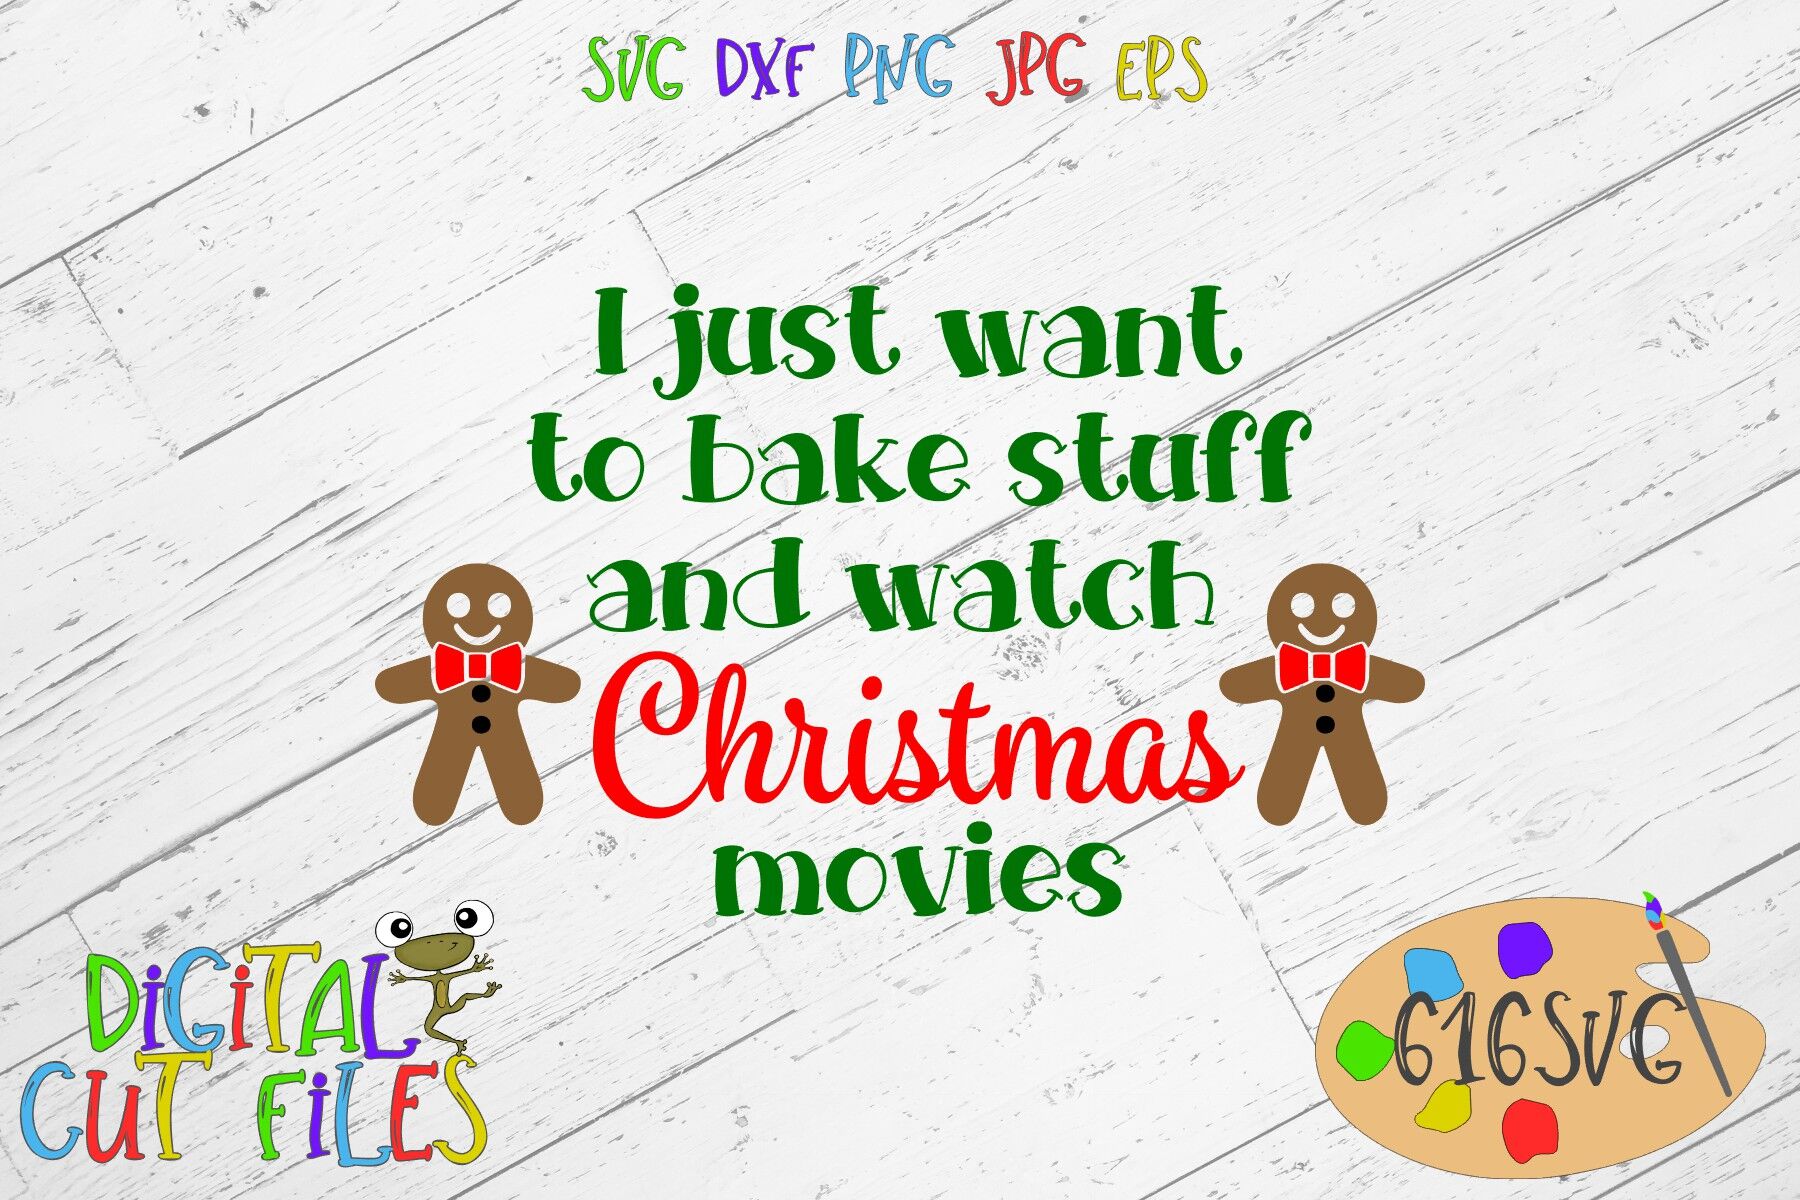 I just want to bake stuff and watch Christmas movies SVG By 616SVG